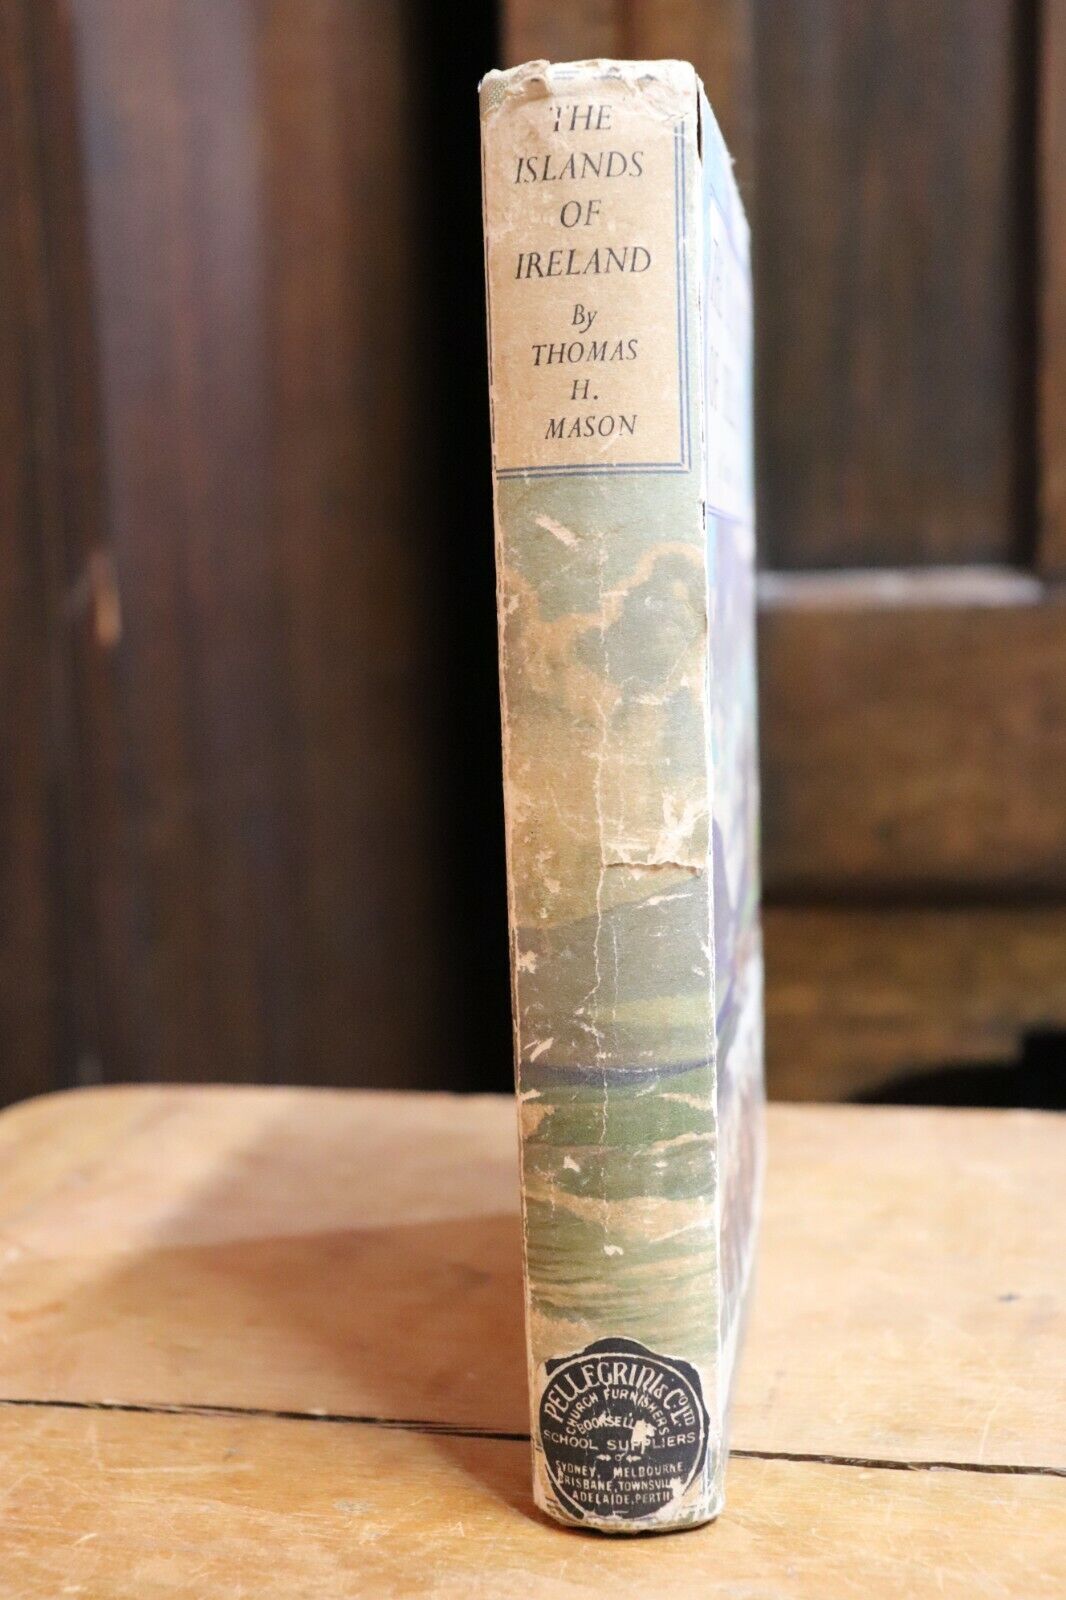 The Islands Of Ireland - 1936 - First Edition - Rare Antiquarian Book